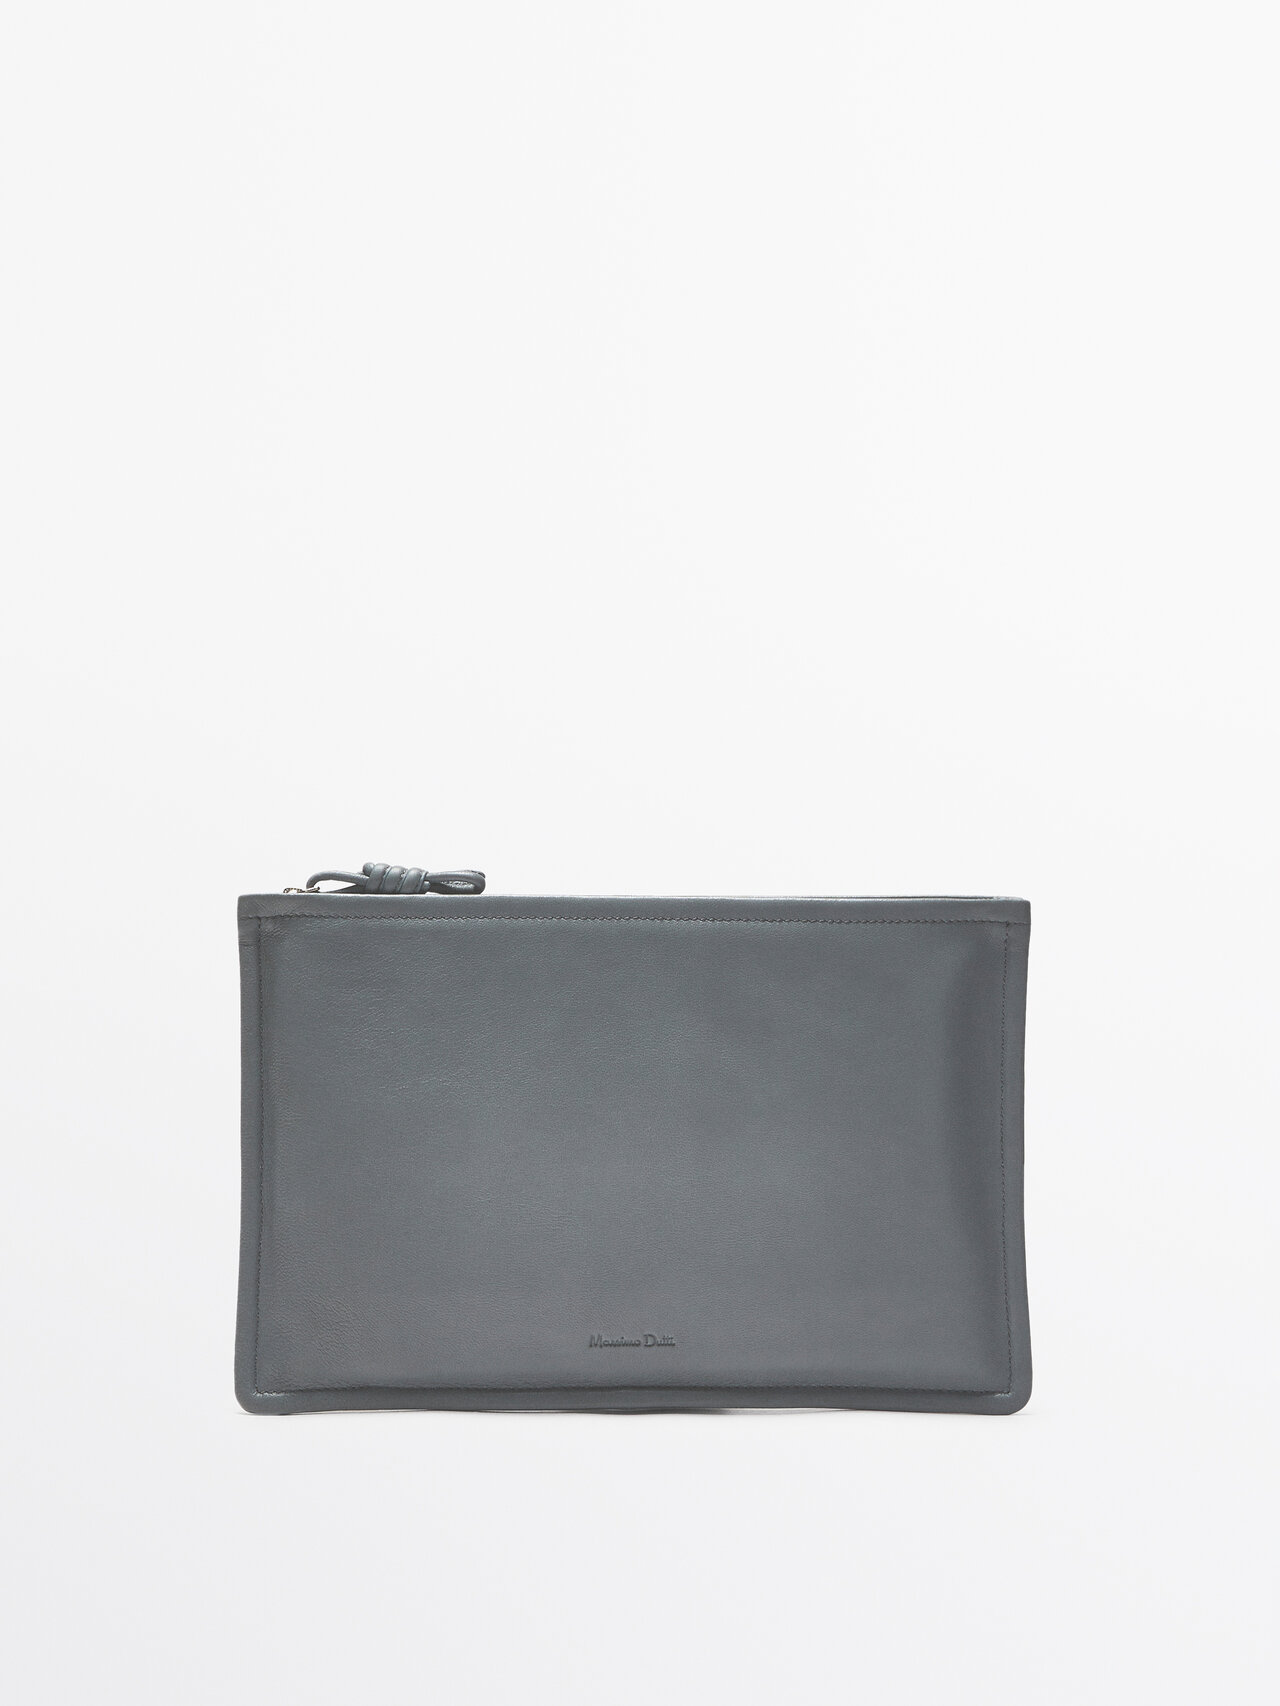 Massimo Dutti Nappa Leather Clutch With Knot Detail In Gray